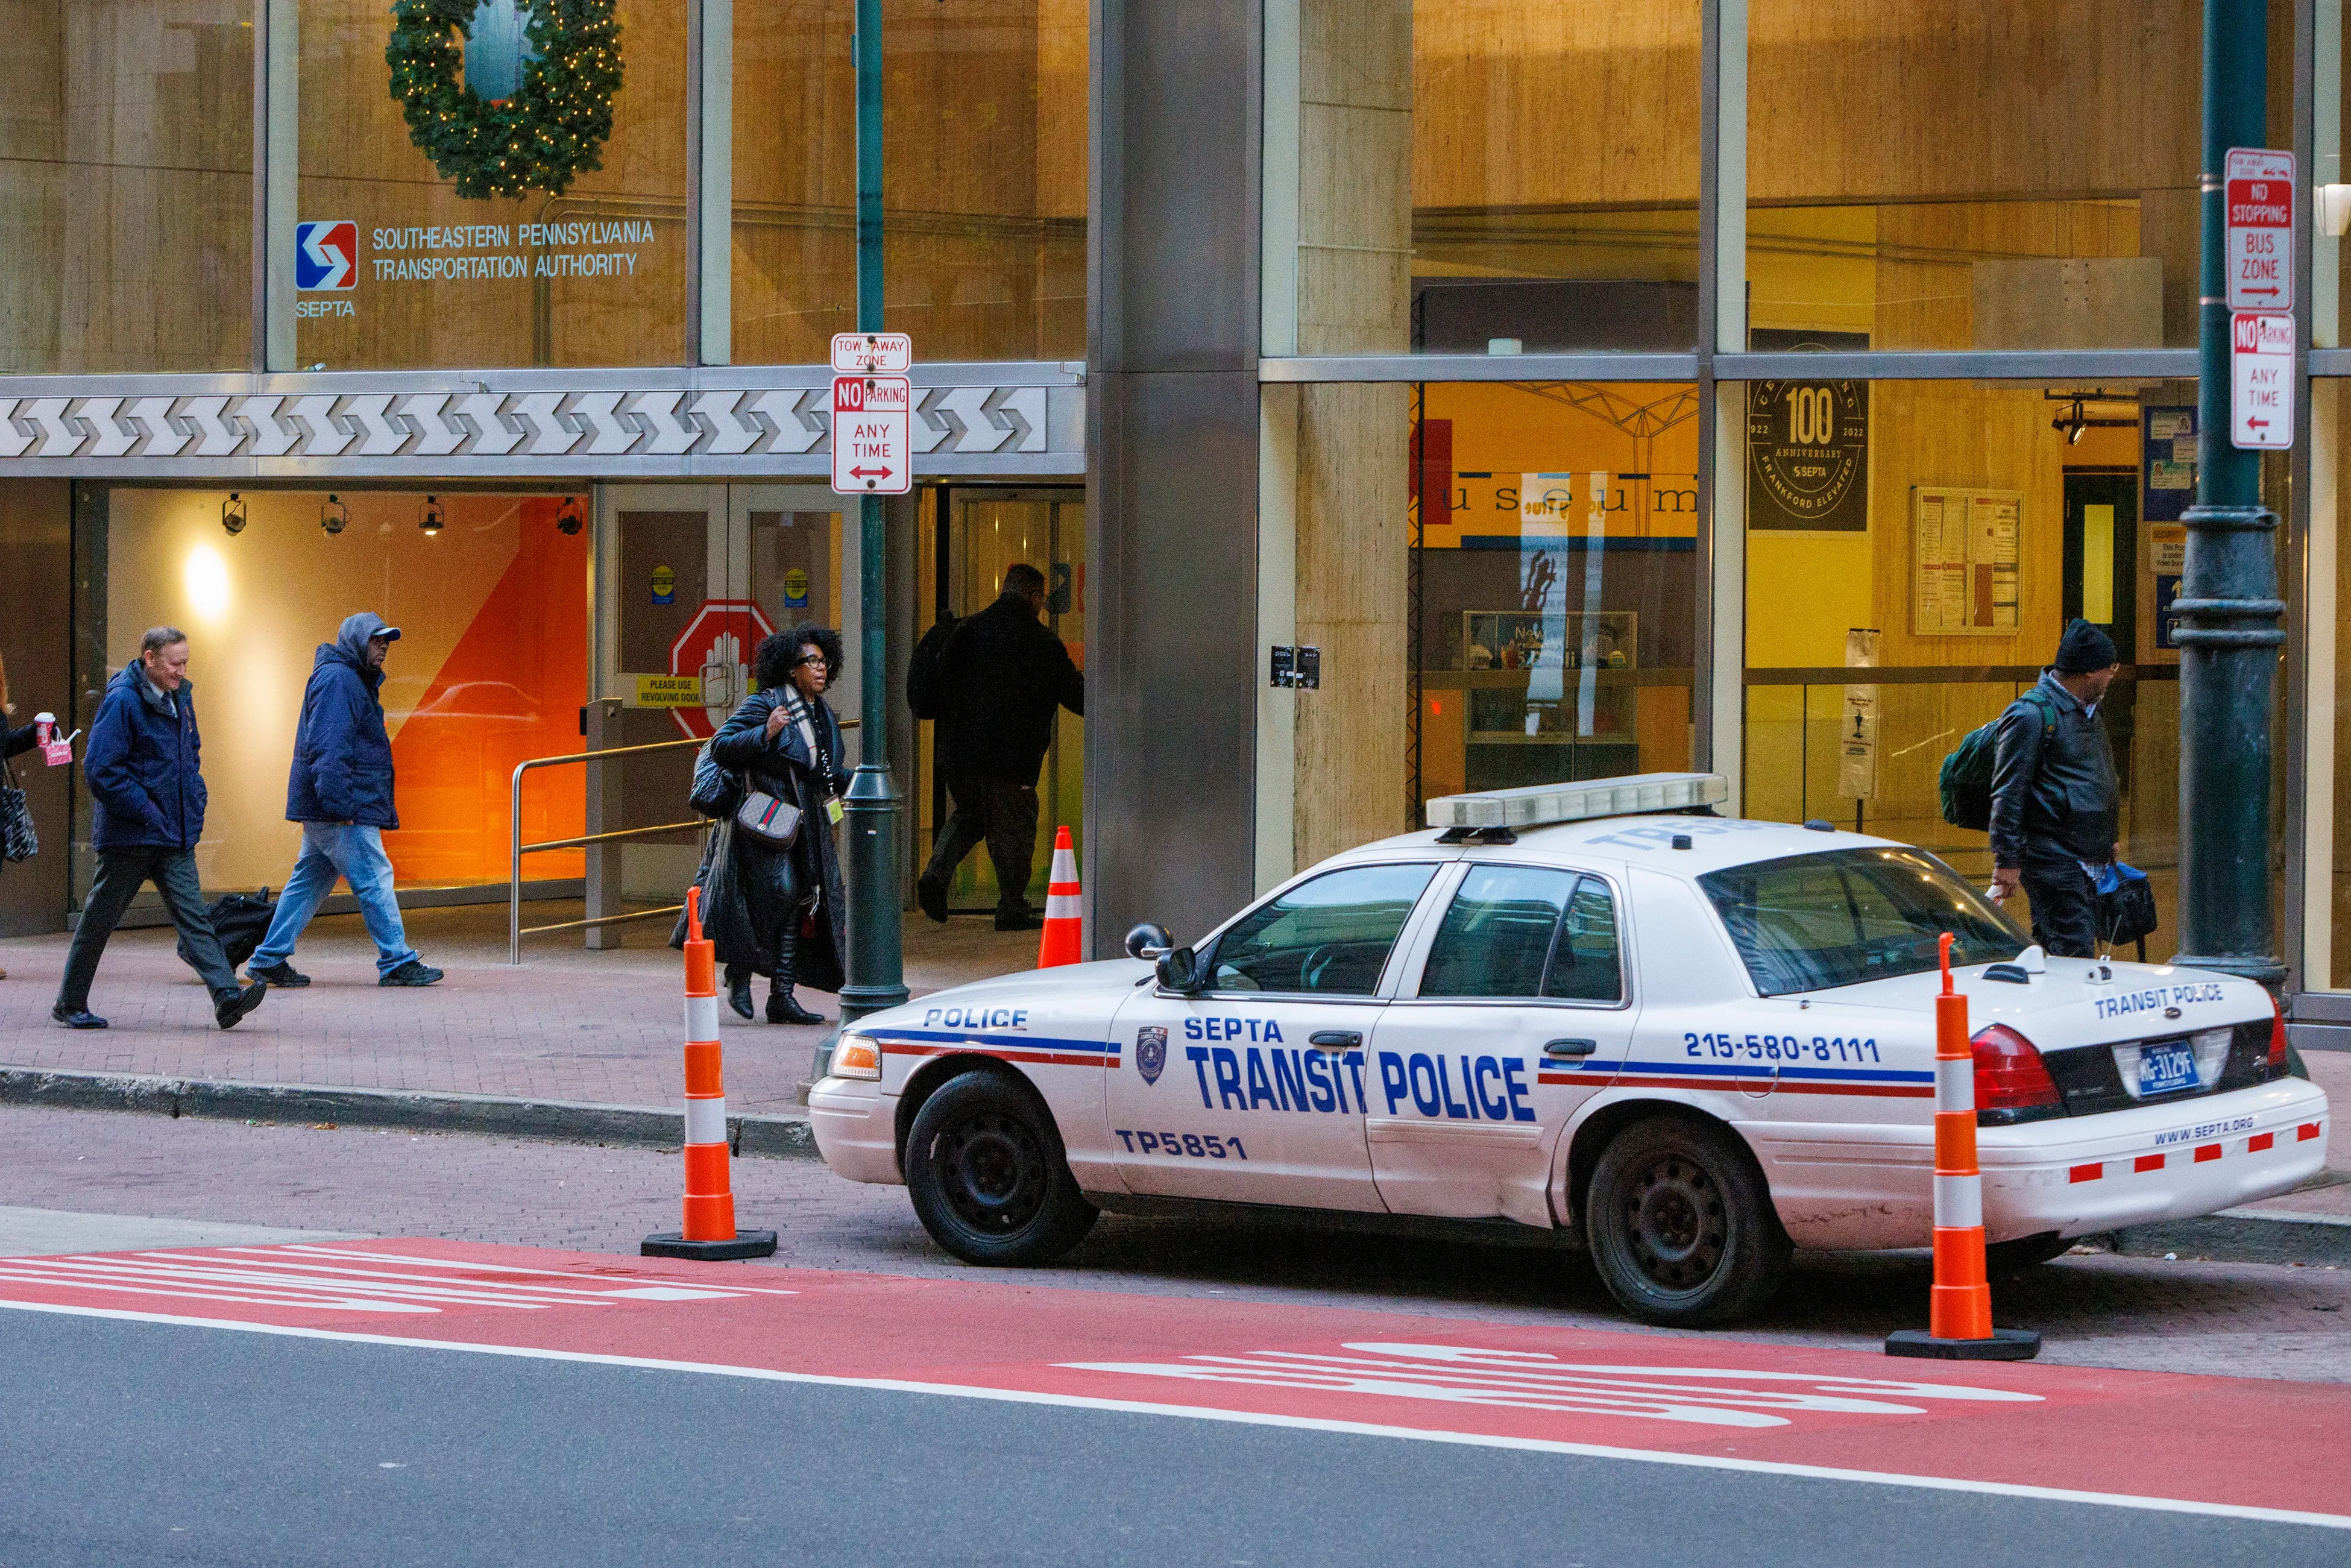 SEPTA Transit police vehicle in front of headquarters on Thursday morning.